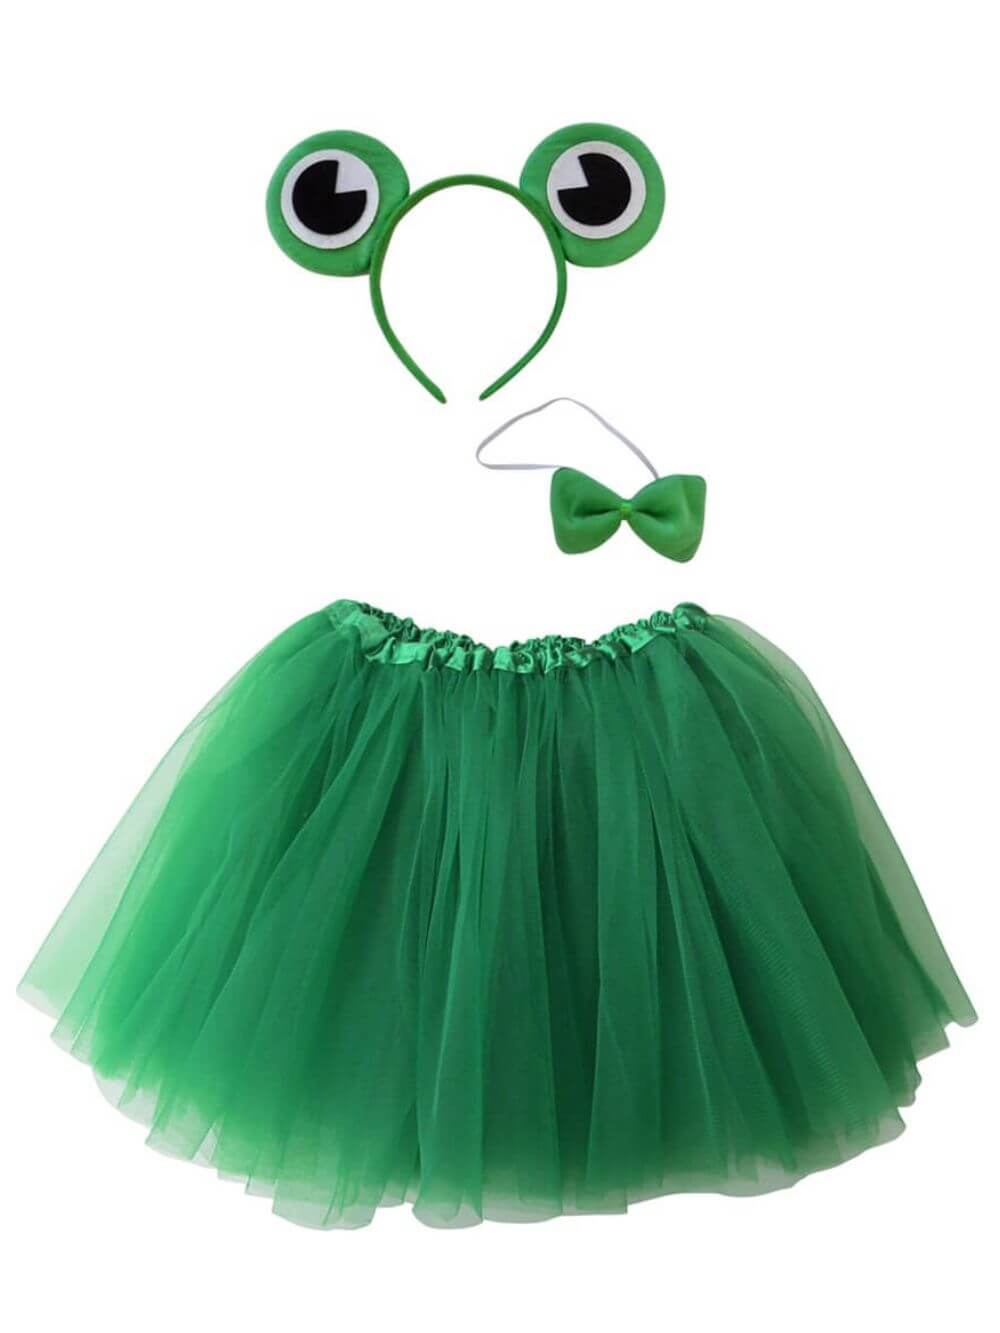 Adult Frog Costume - Green Tutu Skirt, Tail, & Headband Set for Adult or Plus Size - Sydney So Sweet